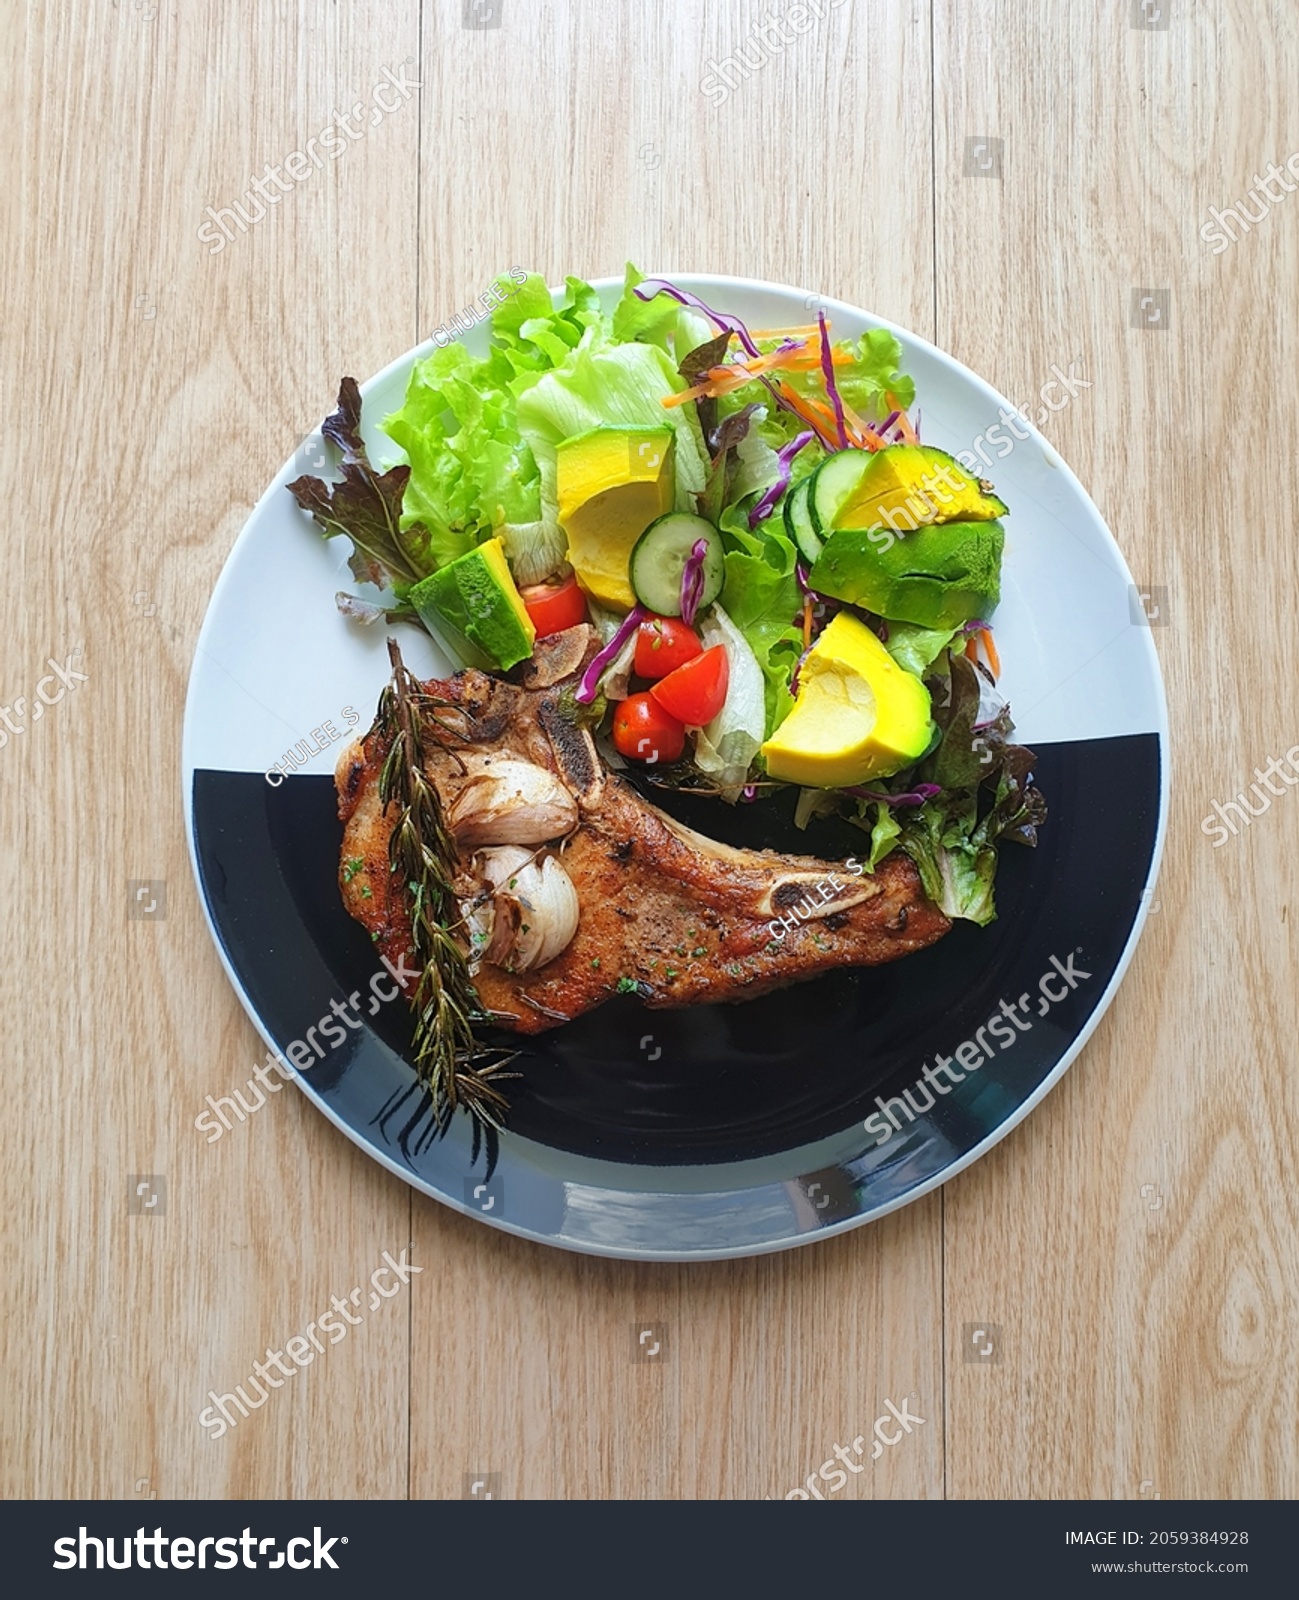 Grilled pork chop steak with salad on the black and white plate. Wooden table. Keto, ketogenic, Atkins diet recipe. Low carb, high fat. Avocado is good fat. Fresh vegetables. Diabetes patients' food. #2059384928